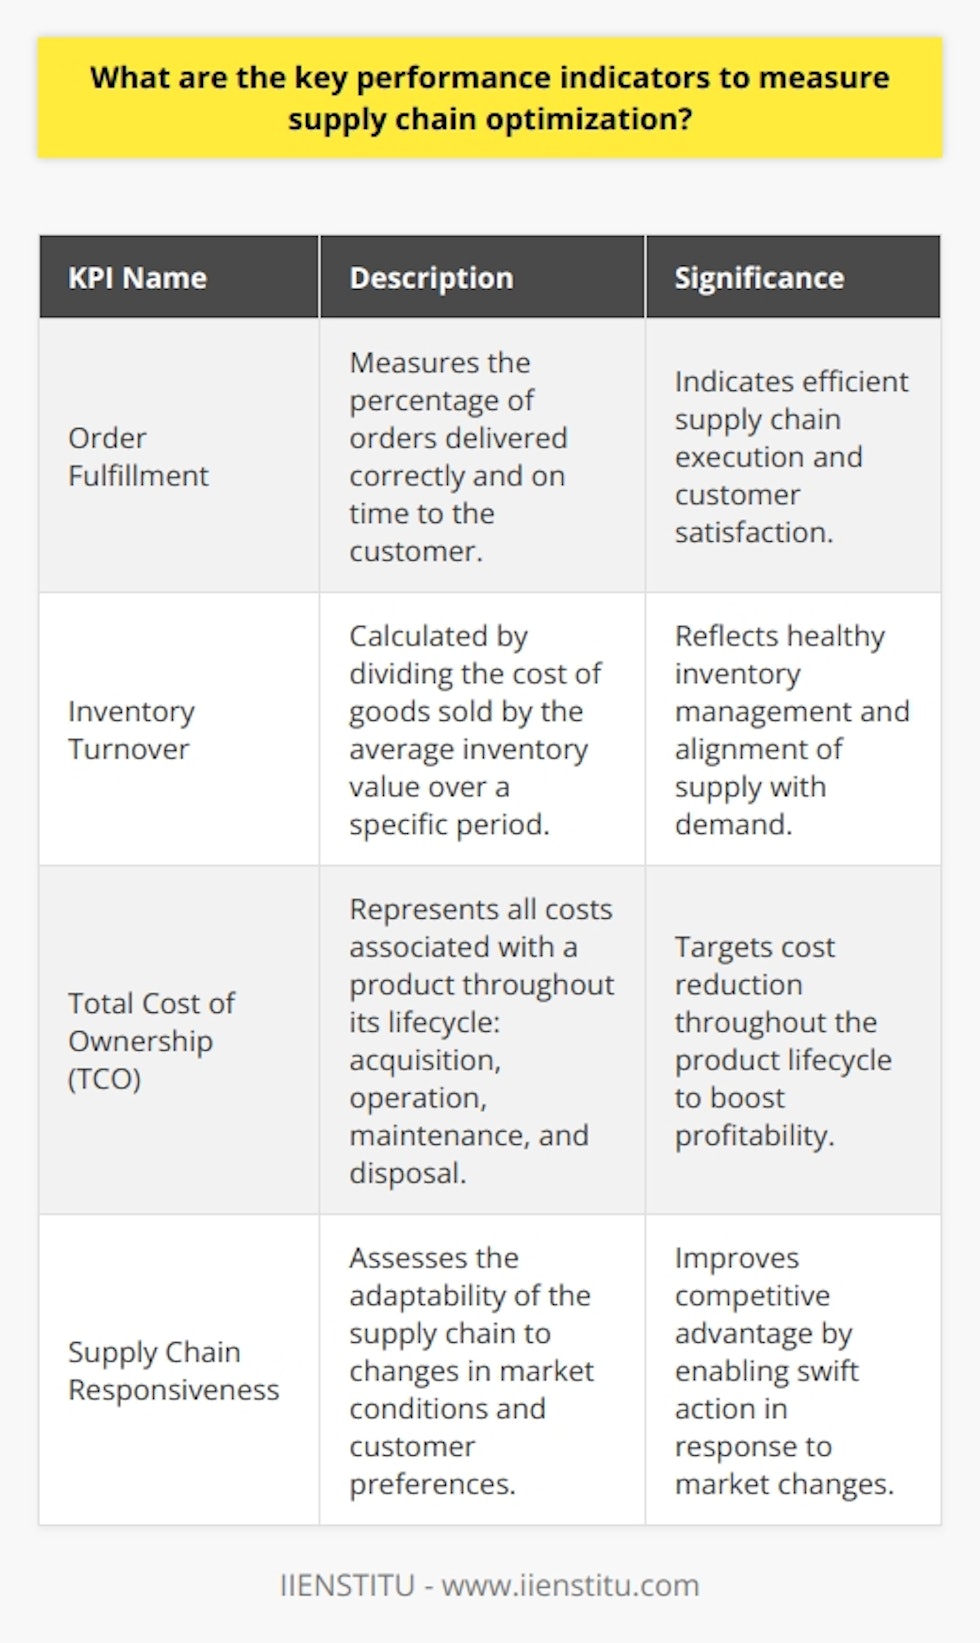 Supply chain optimization is an increasingly critical component of business operations, as efficient supply chain management can significantly impact customer satisfaction, competitive advantage, and the bottom line. By tracking and measuring the right Key Performance Indicators (KPIs), businesses can ensure their supply chains are operating at peak performance levels. Here are four KPIs that are crucial in measuring supply chain optimization:### Order FulfillmentOrder fulfillment efficiency is a core measure of how well a supply chain is functioning. This KPI evaluates how many orders are delivered to the end customer in accordance with promised timeframes and quantities. High rates of order fulfillment indicate successful supply chain execution and a positive customer experience. A supply chain optimized for order fulfillment is characterized by reliable inventory management, efficient warehousing, and effective logistics.### Inventory TurnoverInventory turnover is a critical metric for assessing the health of a company's inventory management practices. It measures the rate at which inventory is used over a given period and is calculated by dividing the cost of goods sold by the average inventory value. Efficient inventory turnover suggests that a company is able to balance demand with supply, keeping enough stock on hand to meet customer needs without incurring unnecessary holding costs. Companies seek to optimize inventory turnover to match industry benchmarks for ideal stocking levels.### Total Cost of Ownership (TCO)TCO encompasses every expense related to a product or system over its entire lifecycle, including acquisition, operation, maintenance, and disposal. In the context of supply chain management, TCO involves costs such as procurement, production, storage, transportation, and waste management. Reducing the TCO can significantly impact a company's profitability. An optimized supply chain, therefore, not only looks at acquiring goods at the lowest possible price but also focuses on efficiencies throughout the product lifecycle to minimize additional costs.### Supply Chain ResponsivenessThis KPI measures a supply chain's ability to react to market volatility, changes in customer preference, or disruptions. It is a reflection of how quickly a company can adjust production levels, modify product offerings, or launch new products. Supply chain responsiveness involves real-time data analytics, forecast accuracy, speed of communication between partners, and the agility to reconfigure logistics. In fast-paced market environments, being responsive can differentiate a company from its competitors and allow it to thrive amid changes.### Conclusion Efficiently managed KPIs such as order fulfillment, inventory turnover, total cost of ownership, and supply chain responsiveness are instrumental in diagnosing the performance of supply chain operations. By understanding these KPIs, organizations can embark on continuous improvement processes to enhance supply chain efficiency, align operational objectives with business strategy, and ultimately provide superior value to customers. As the global market continues to evolve, the significance of developing and maintaining an optimized supply chain only increases, making the proactive management of these KPIs more important than ever.